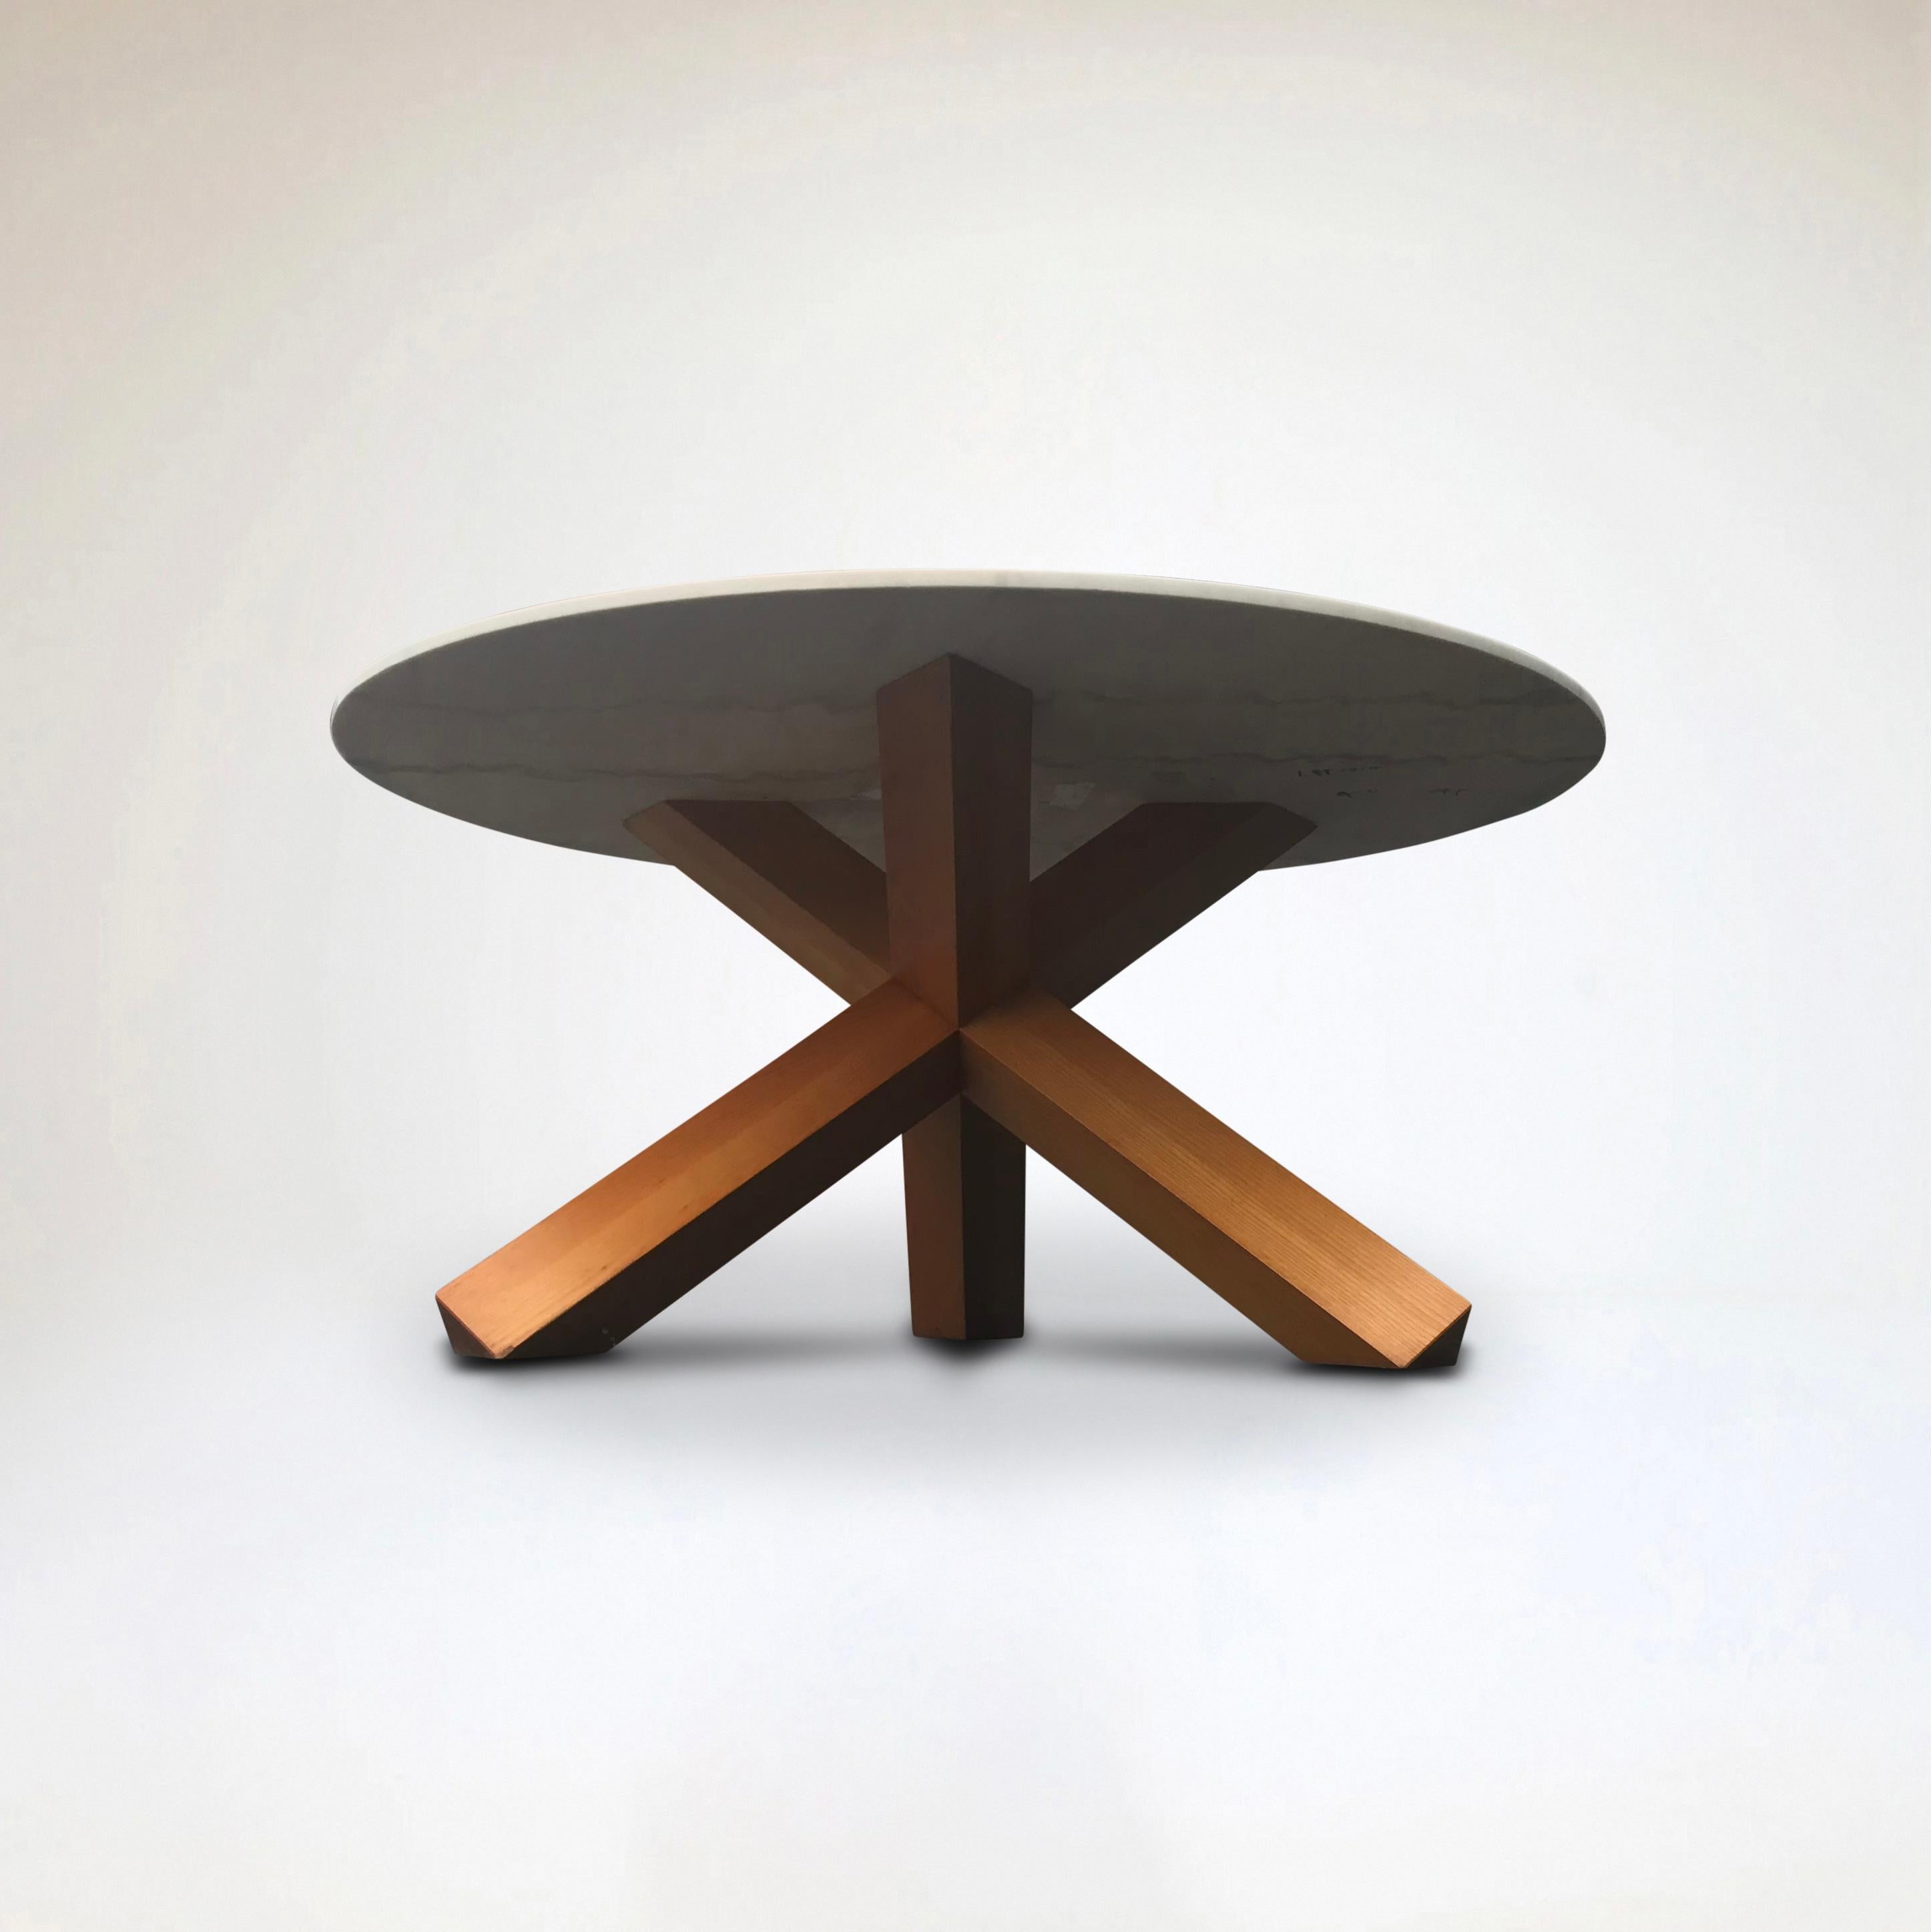 La Rotonda Ash and marble dining table by Mario Bellini for Cassina 1980s For Sale 1